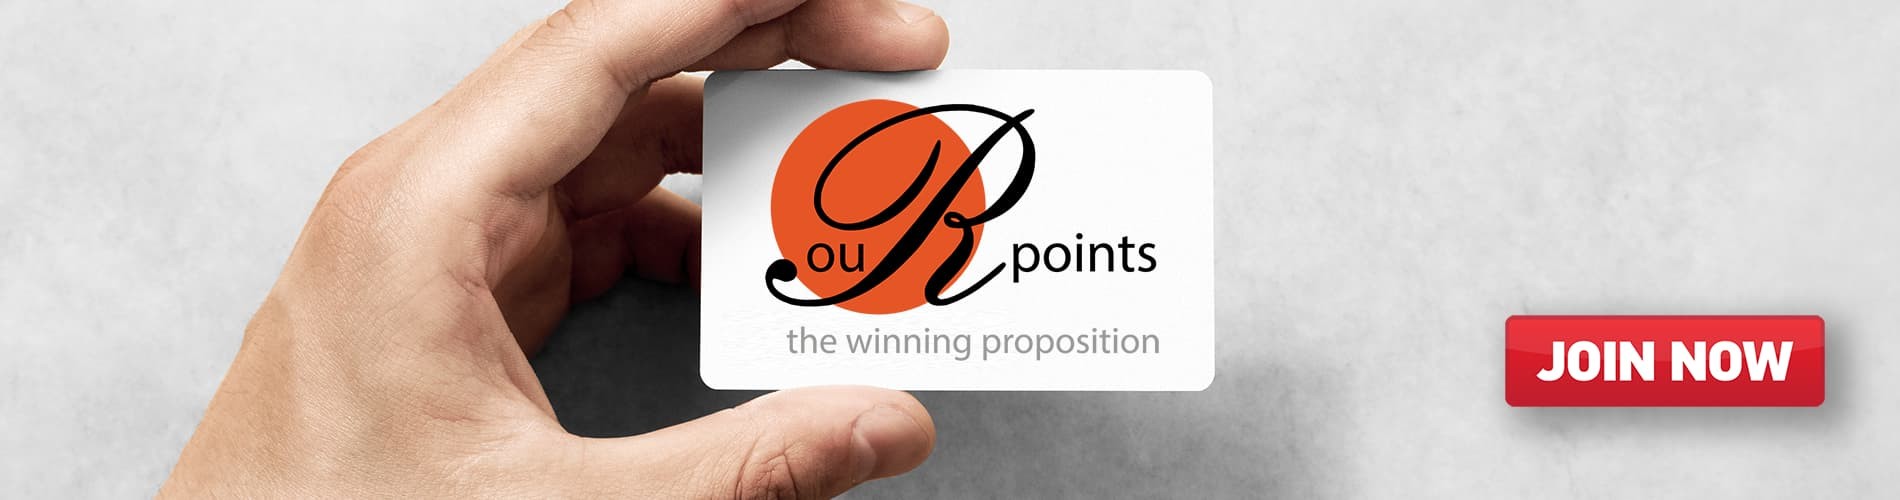 ouR points_slider